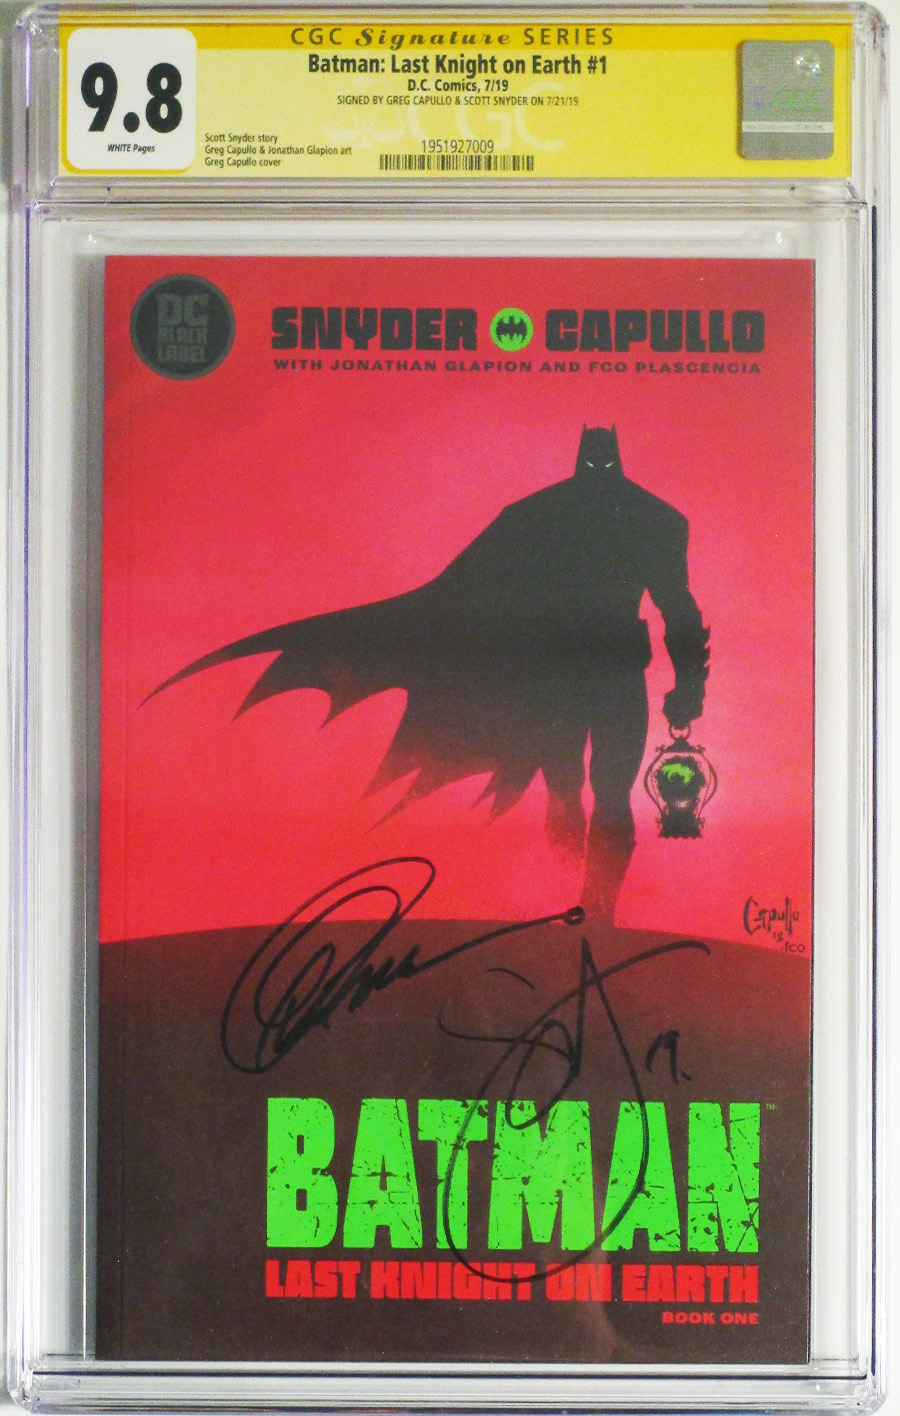 Batman Last Knight On Earth #1 Cover F 1st Ptg Regular Greg Capullo Cover CGC Signature Series 9.8 Signed by Greg Capullo and Scott Snyder